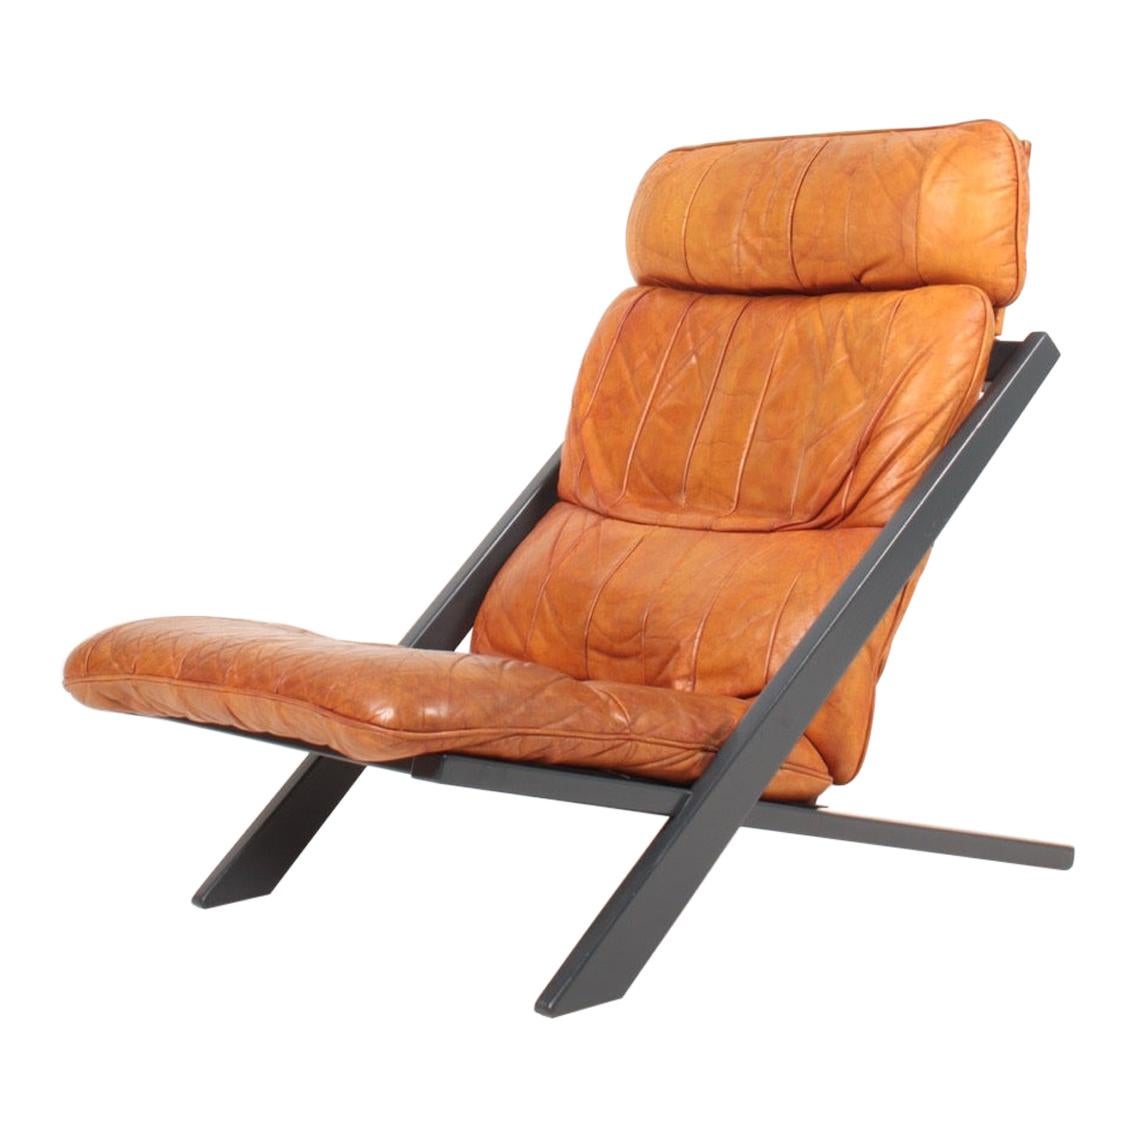 Midcentury Lounge Chair by Ueli Berger for De Sede Lounge in Cognac Leather